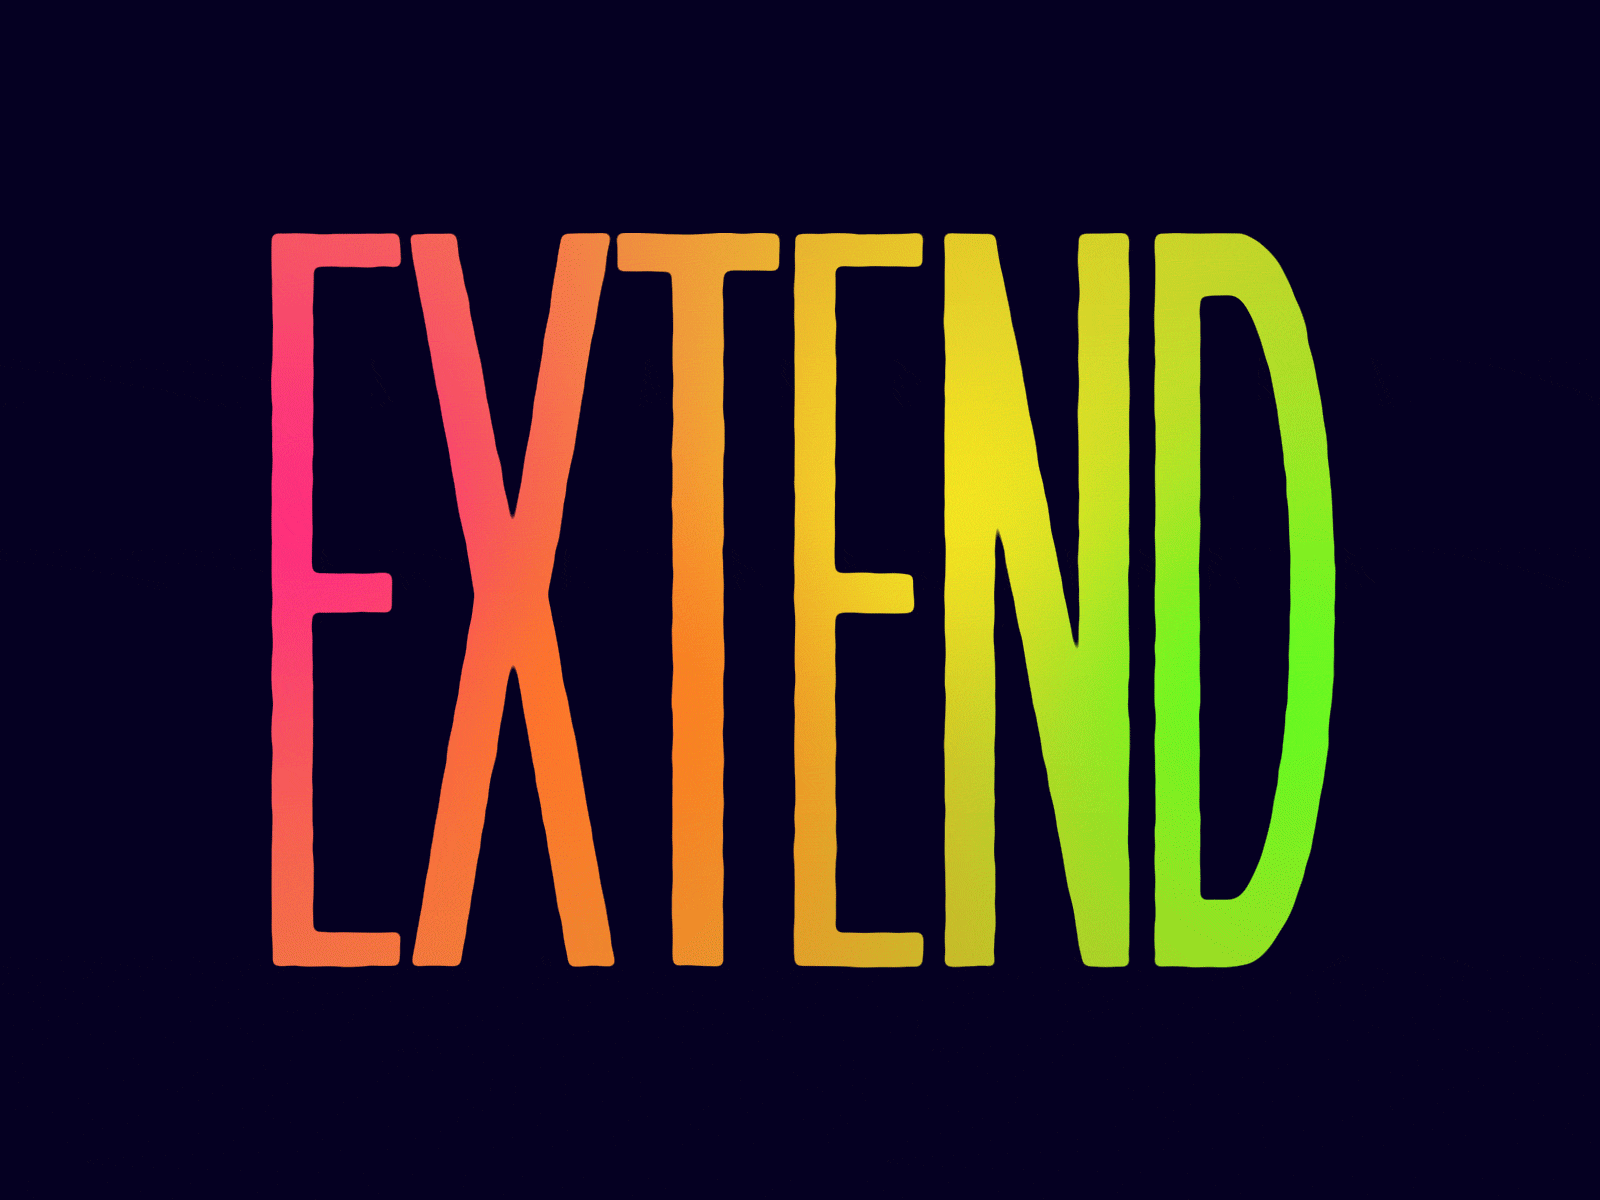 Extend Text Animation after effects tutorial animatedgif animation after effects colorful design cycle design extended font font animation gif insideofmotion loop motion design motion graphics stretch font stretched animation stretched text text animation tutorial type animation typography animation